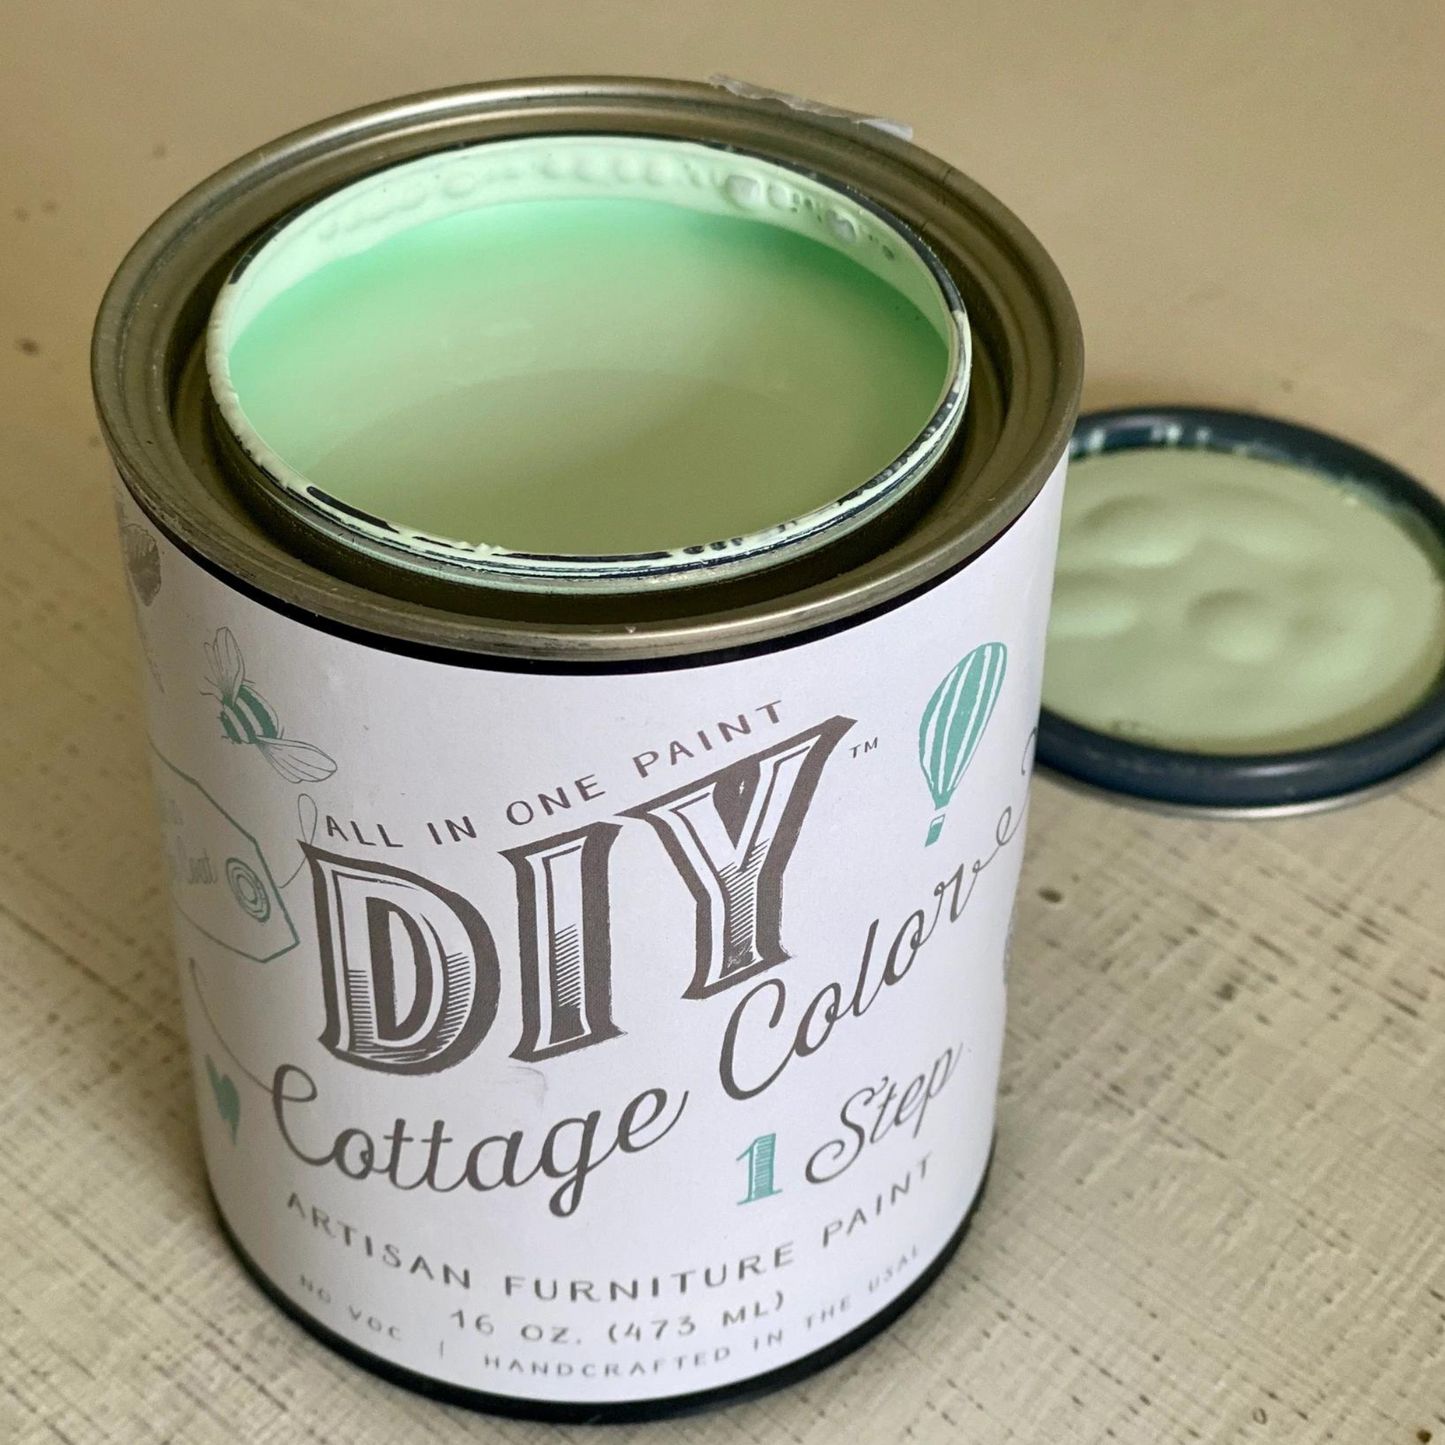 Open can example of Vintage Mint - DIY Cottage Color Paint curated by Jamie Ray Vintage. Available in pints at Milton's Daughter.